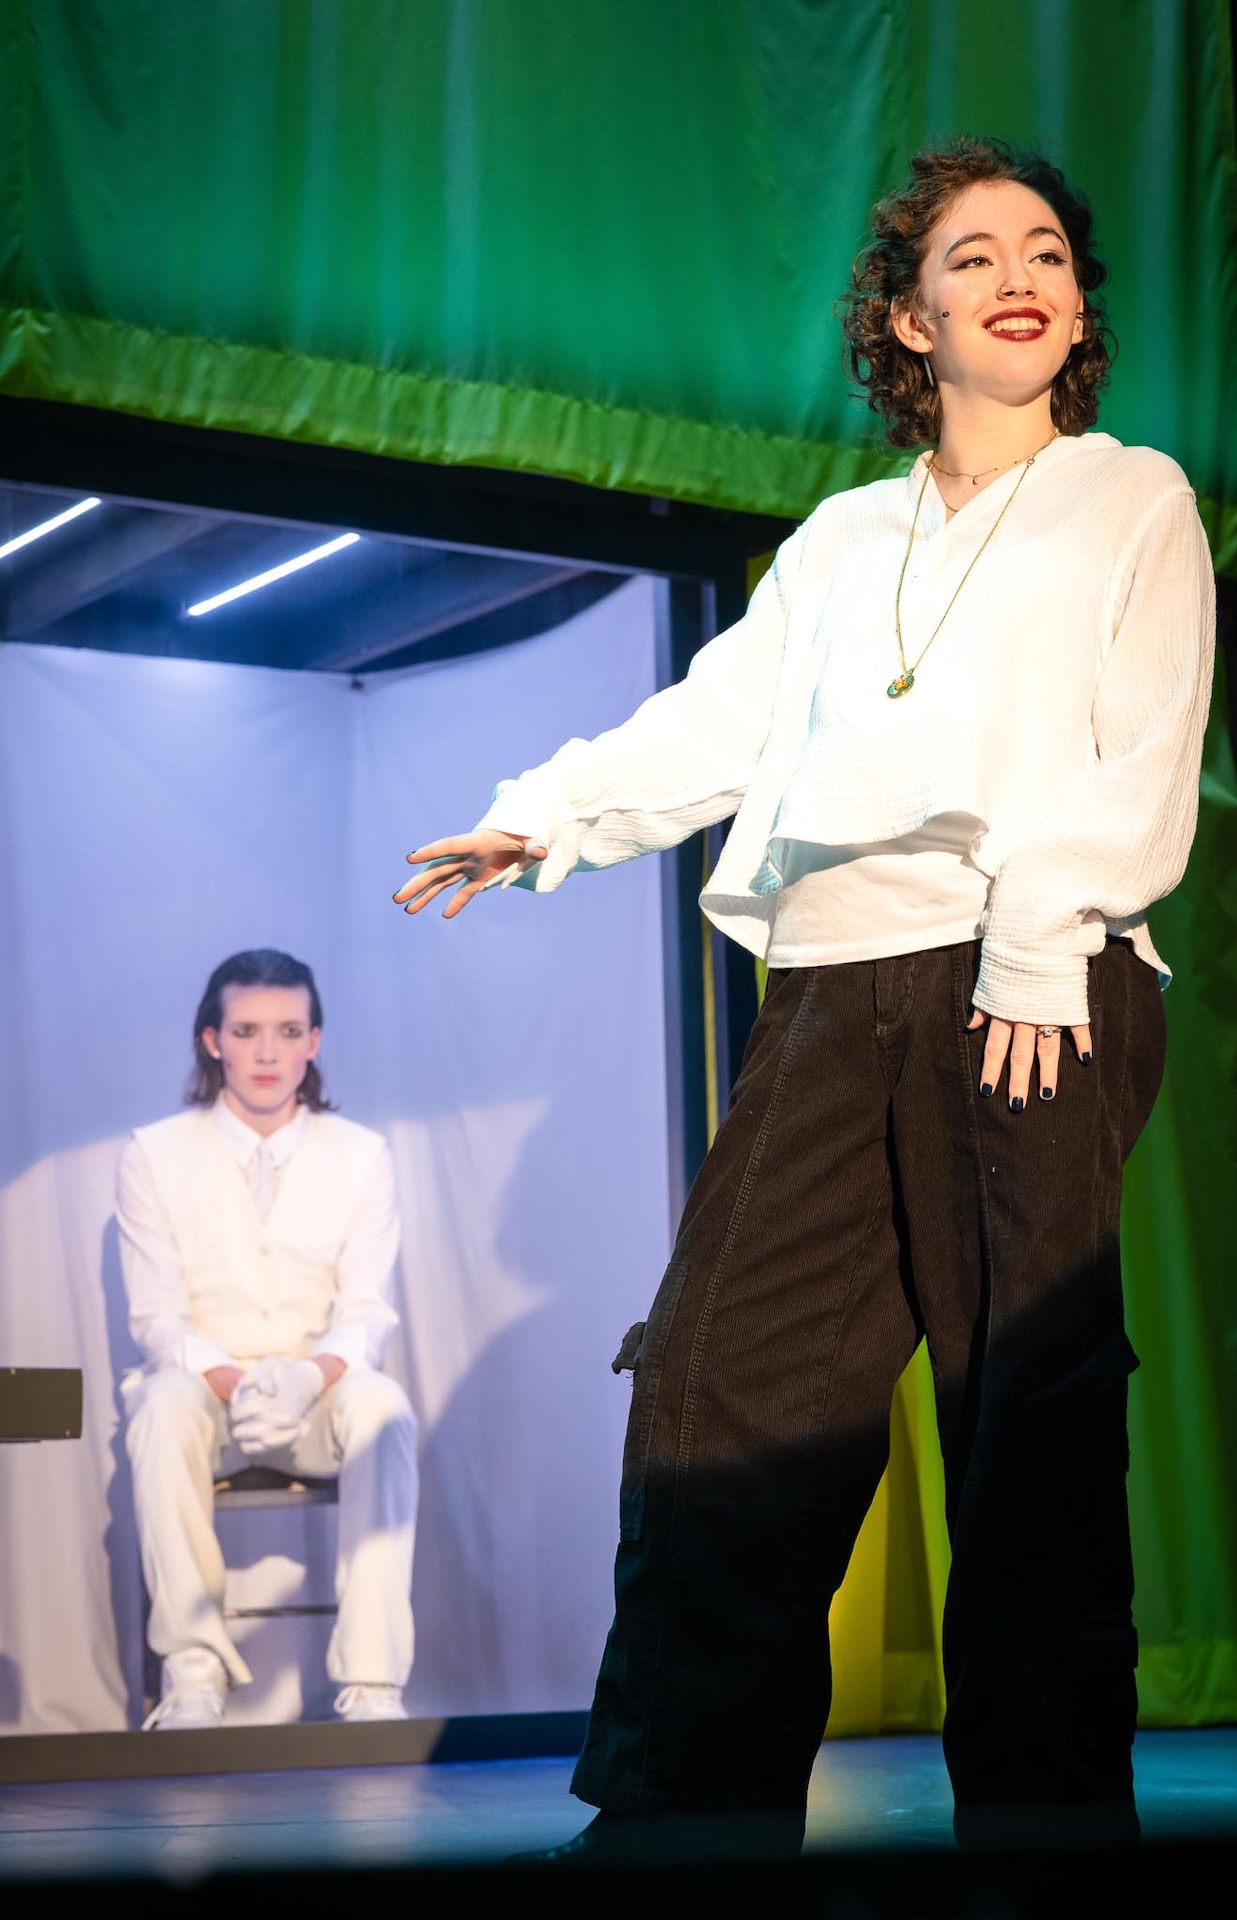 actor standing in foreground wearing white shirt and other actor sitting in background in all white costume